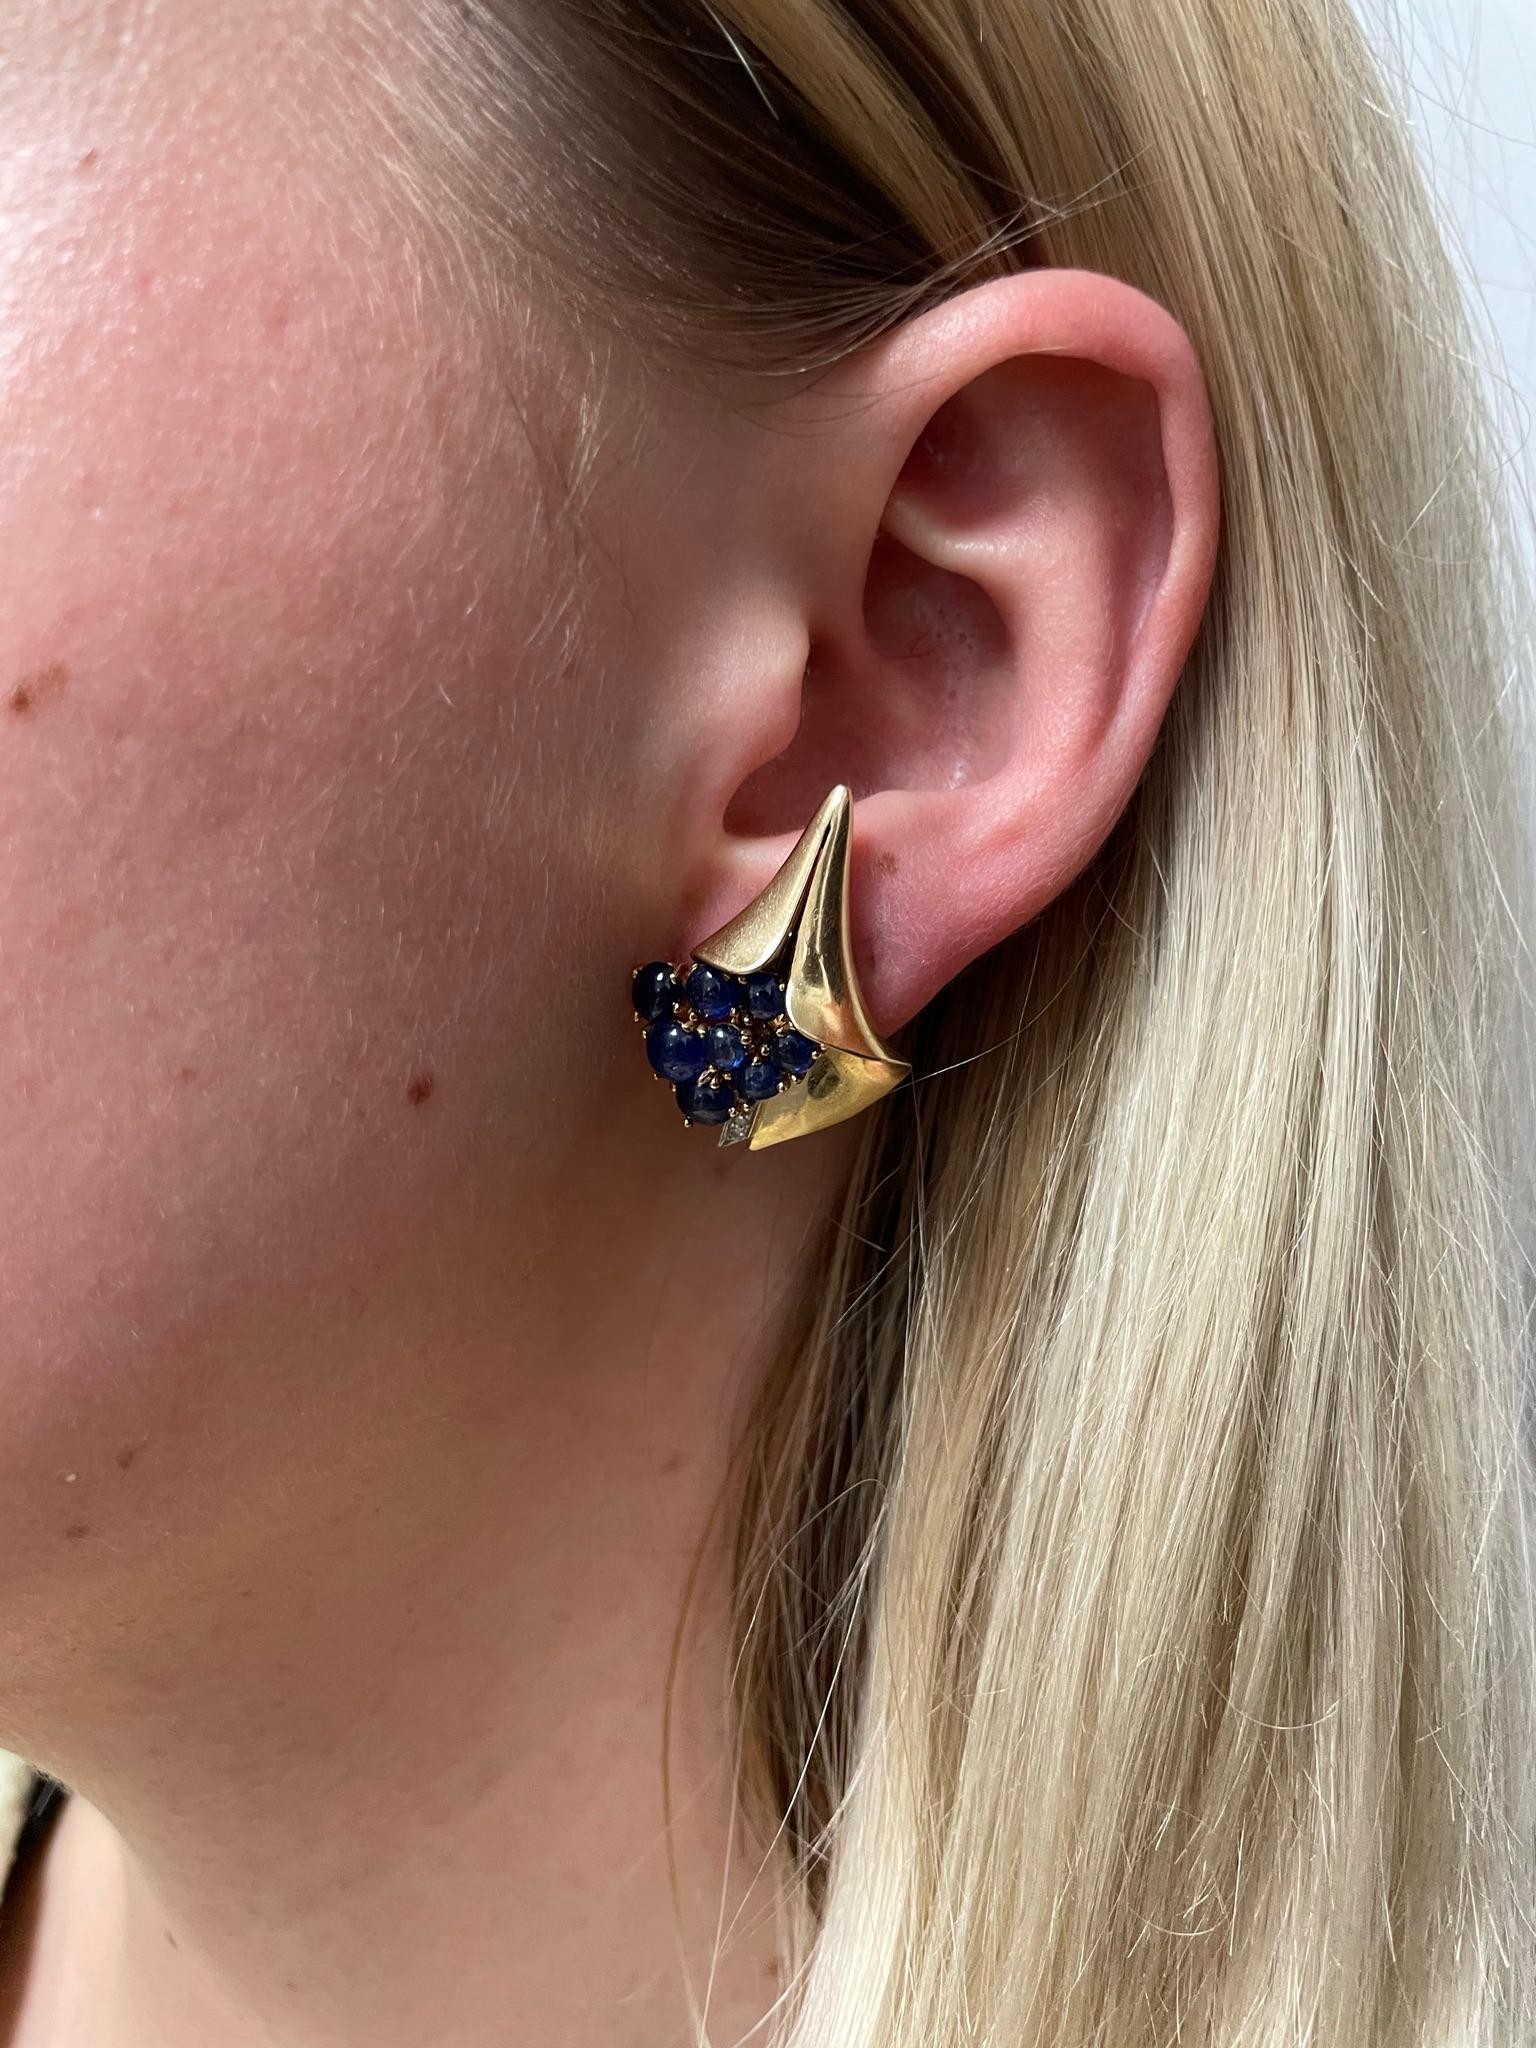 A pair of Mauboussin Sapphire Cabochon Earrings by Trabert & Hoeffer in the Reflection Collection by MAUBOUSSIN. There are 9 sapphire cabochons on each earring with Diamonds. The earrings are made in 18 Karat Yellow Gold. Designed and executed for